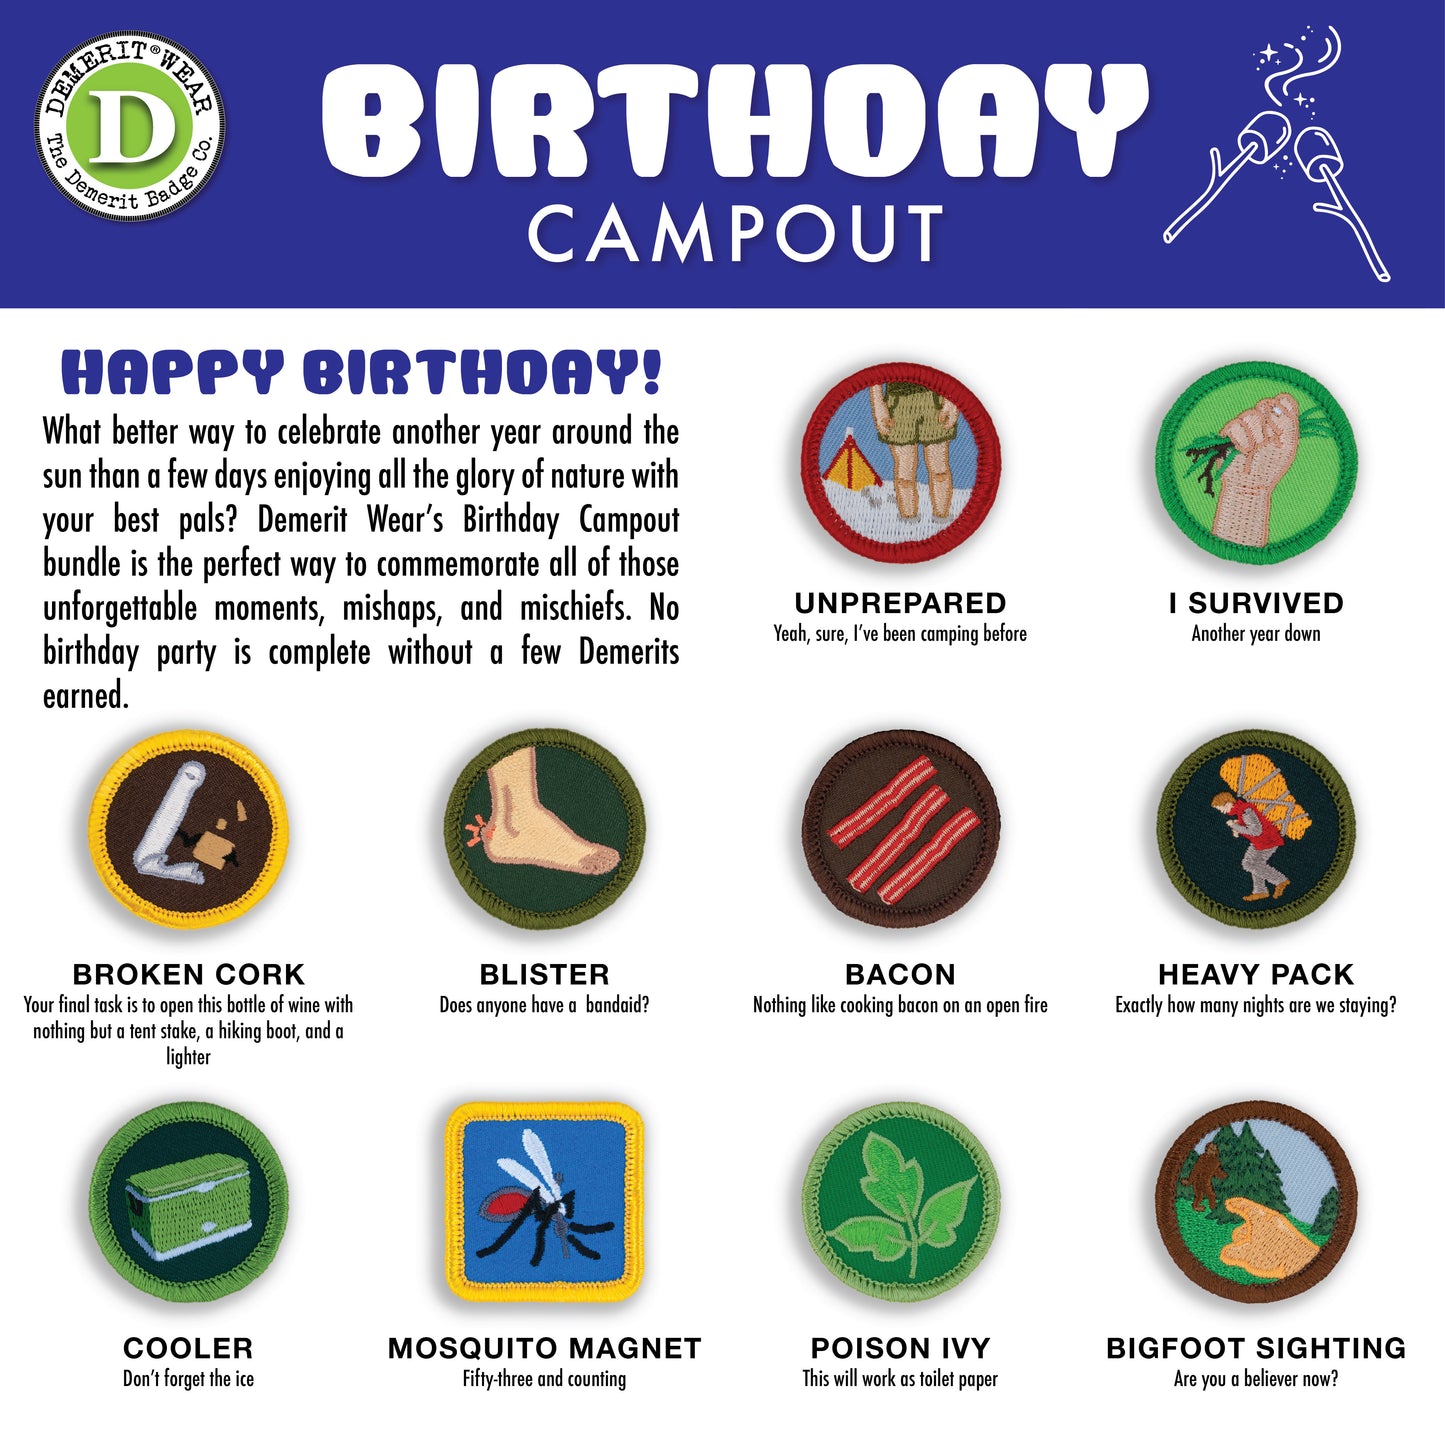 Campout Birthday Demerit Badge - iron-on, velcro, adhesive patches